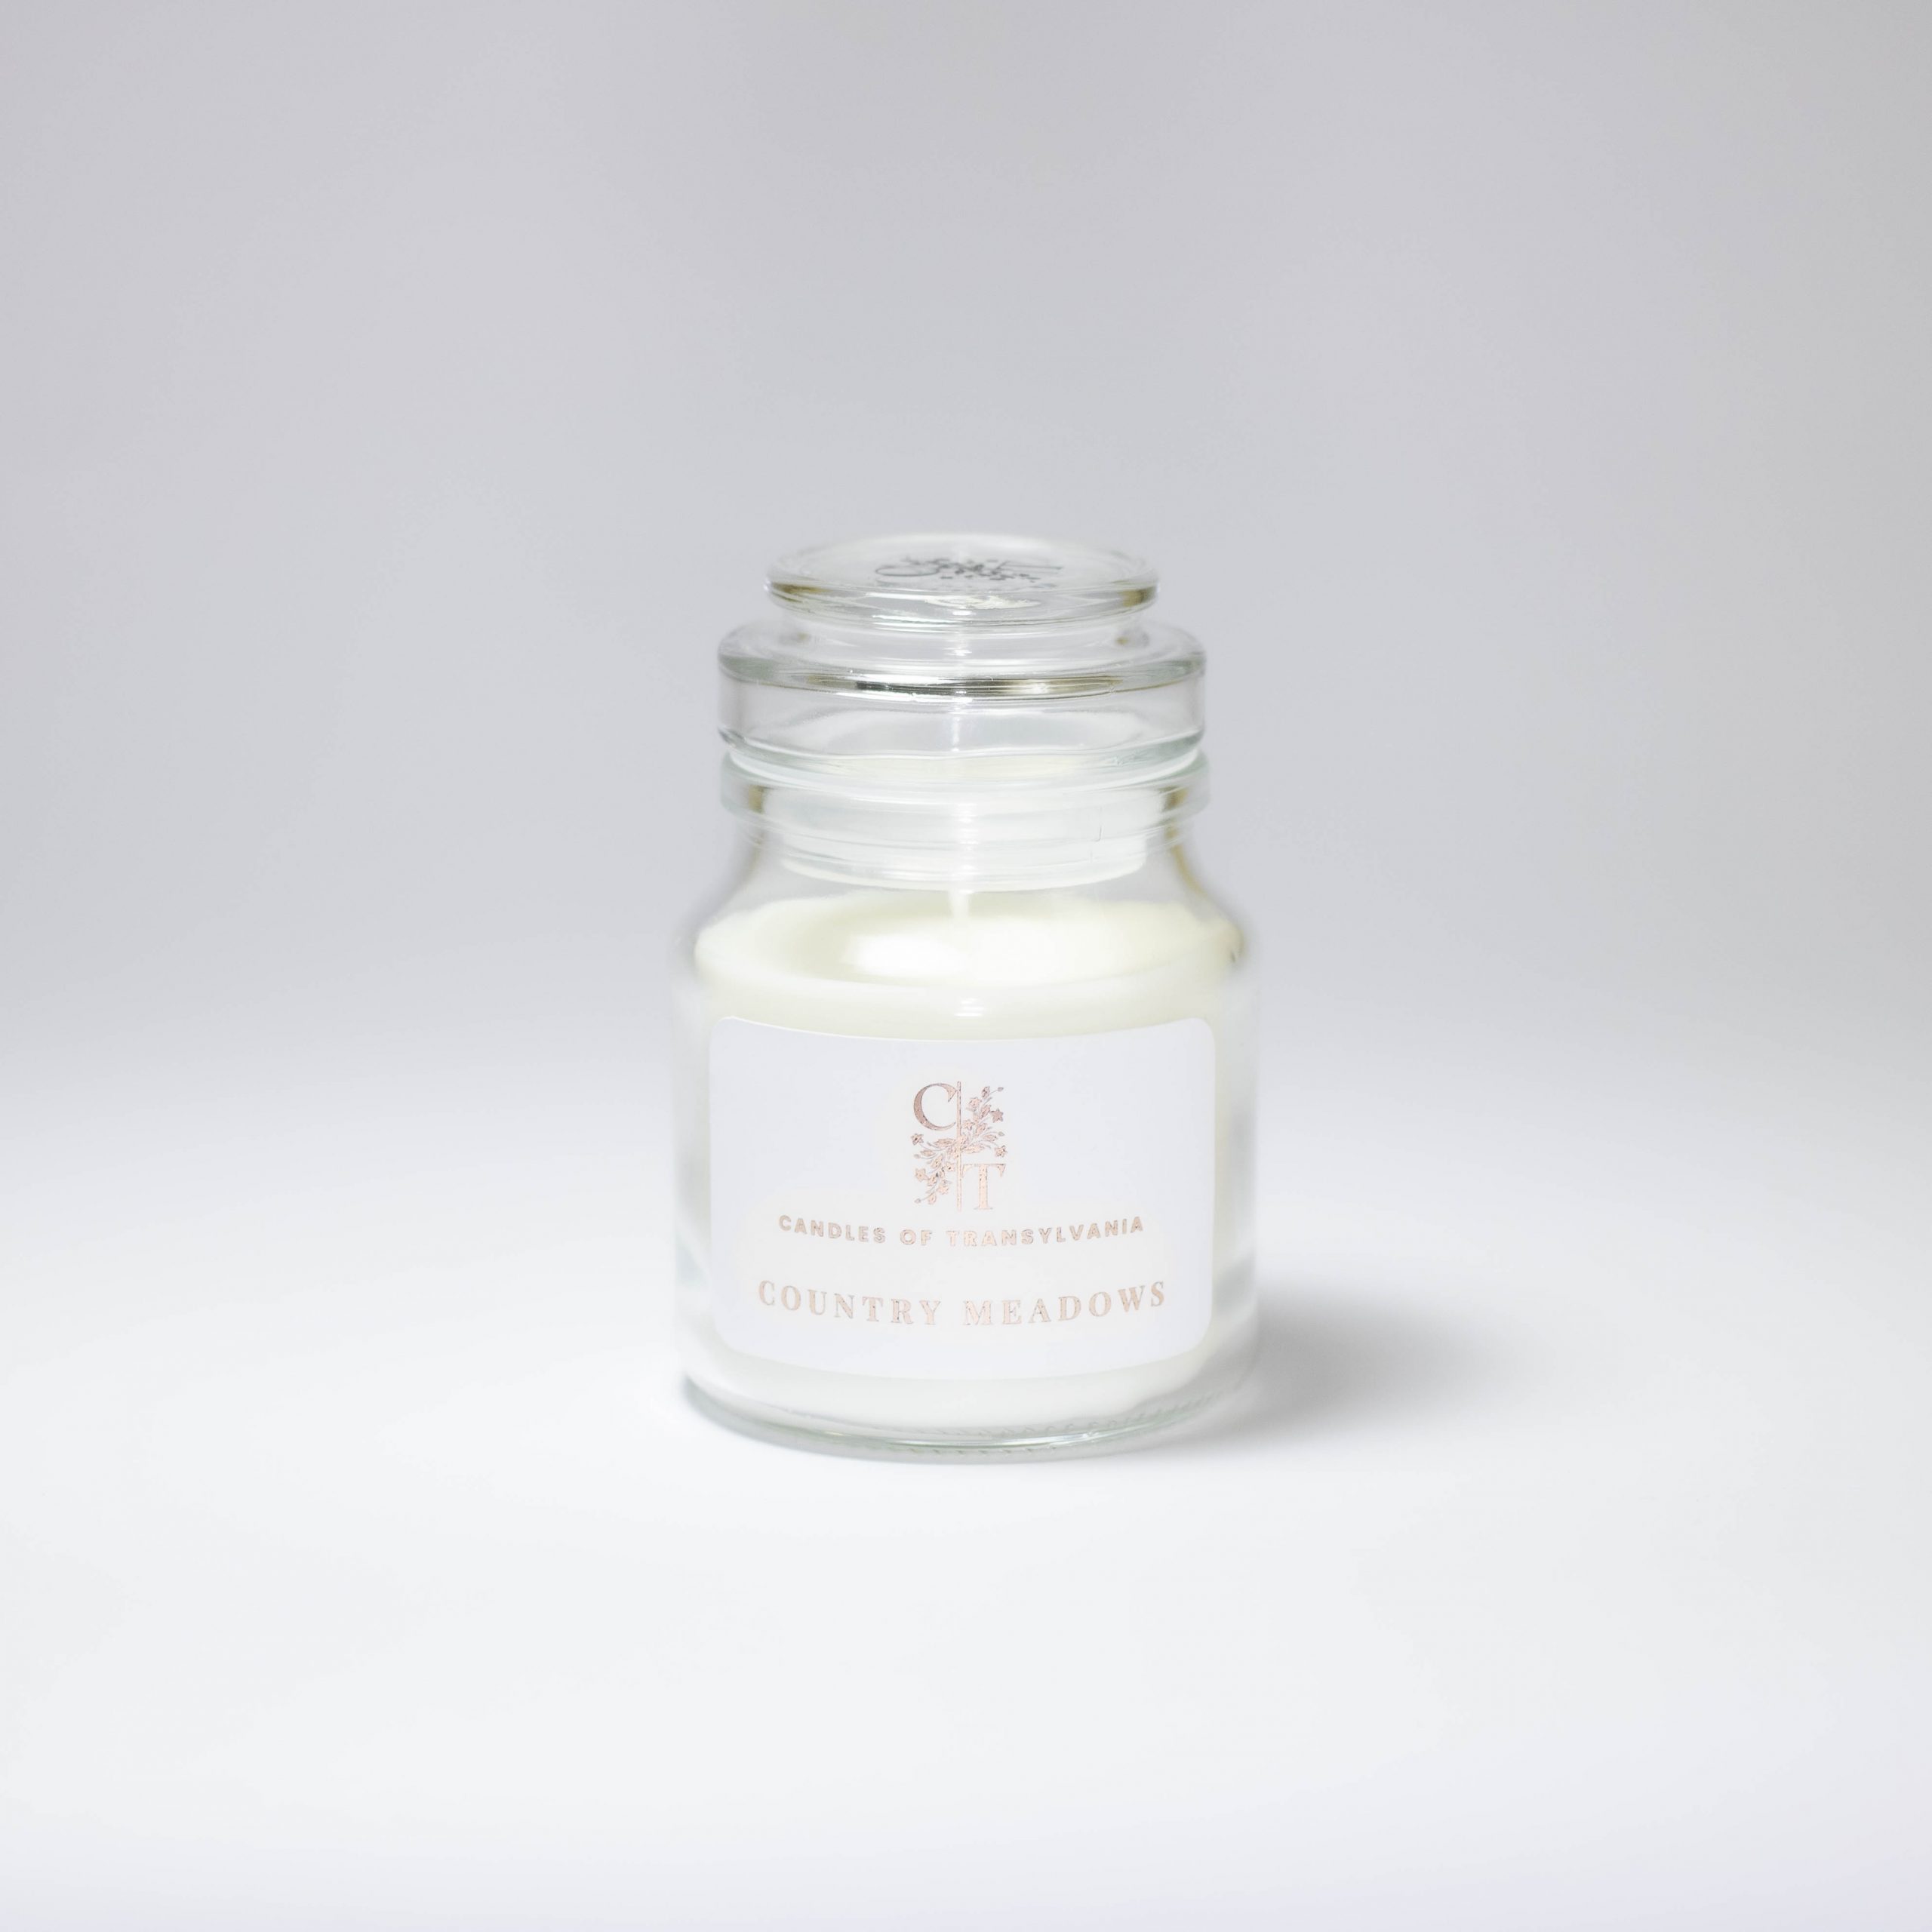 COUNTRY MEADOWS SCENTED CANDLE-65368a3b